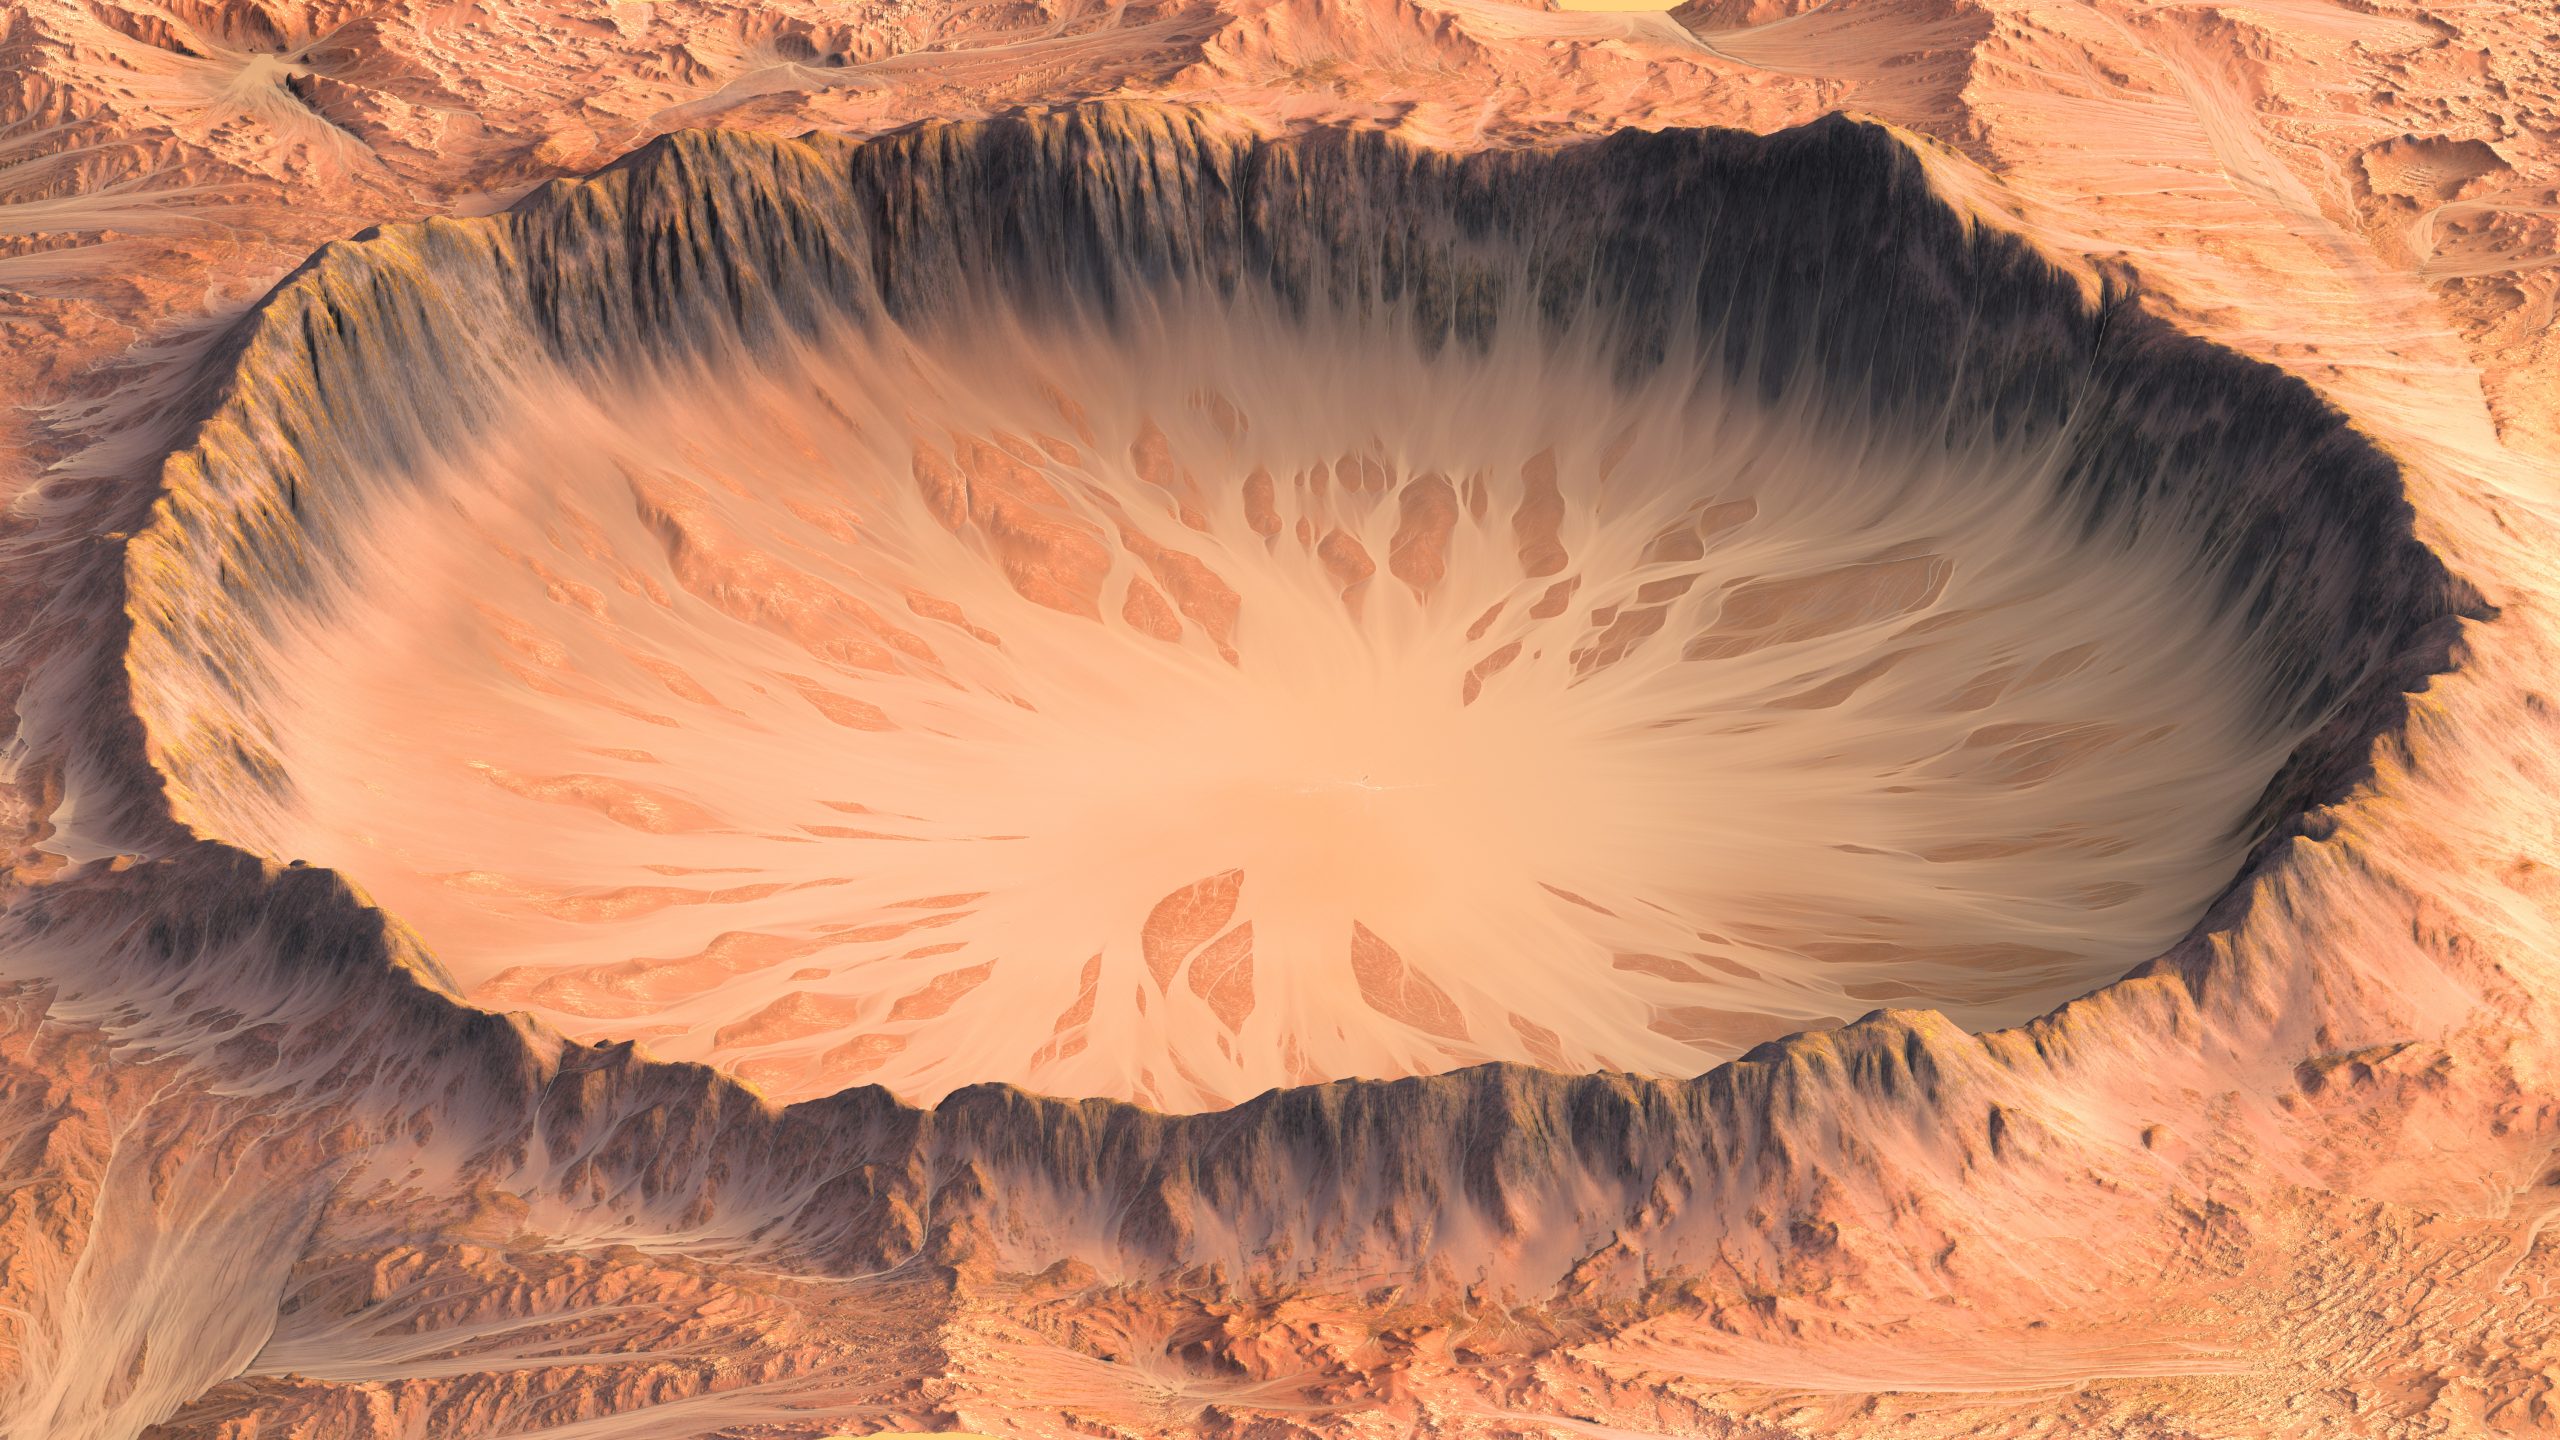 An illustration showing an impact crater by an interstellar object. Depositphotos.